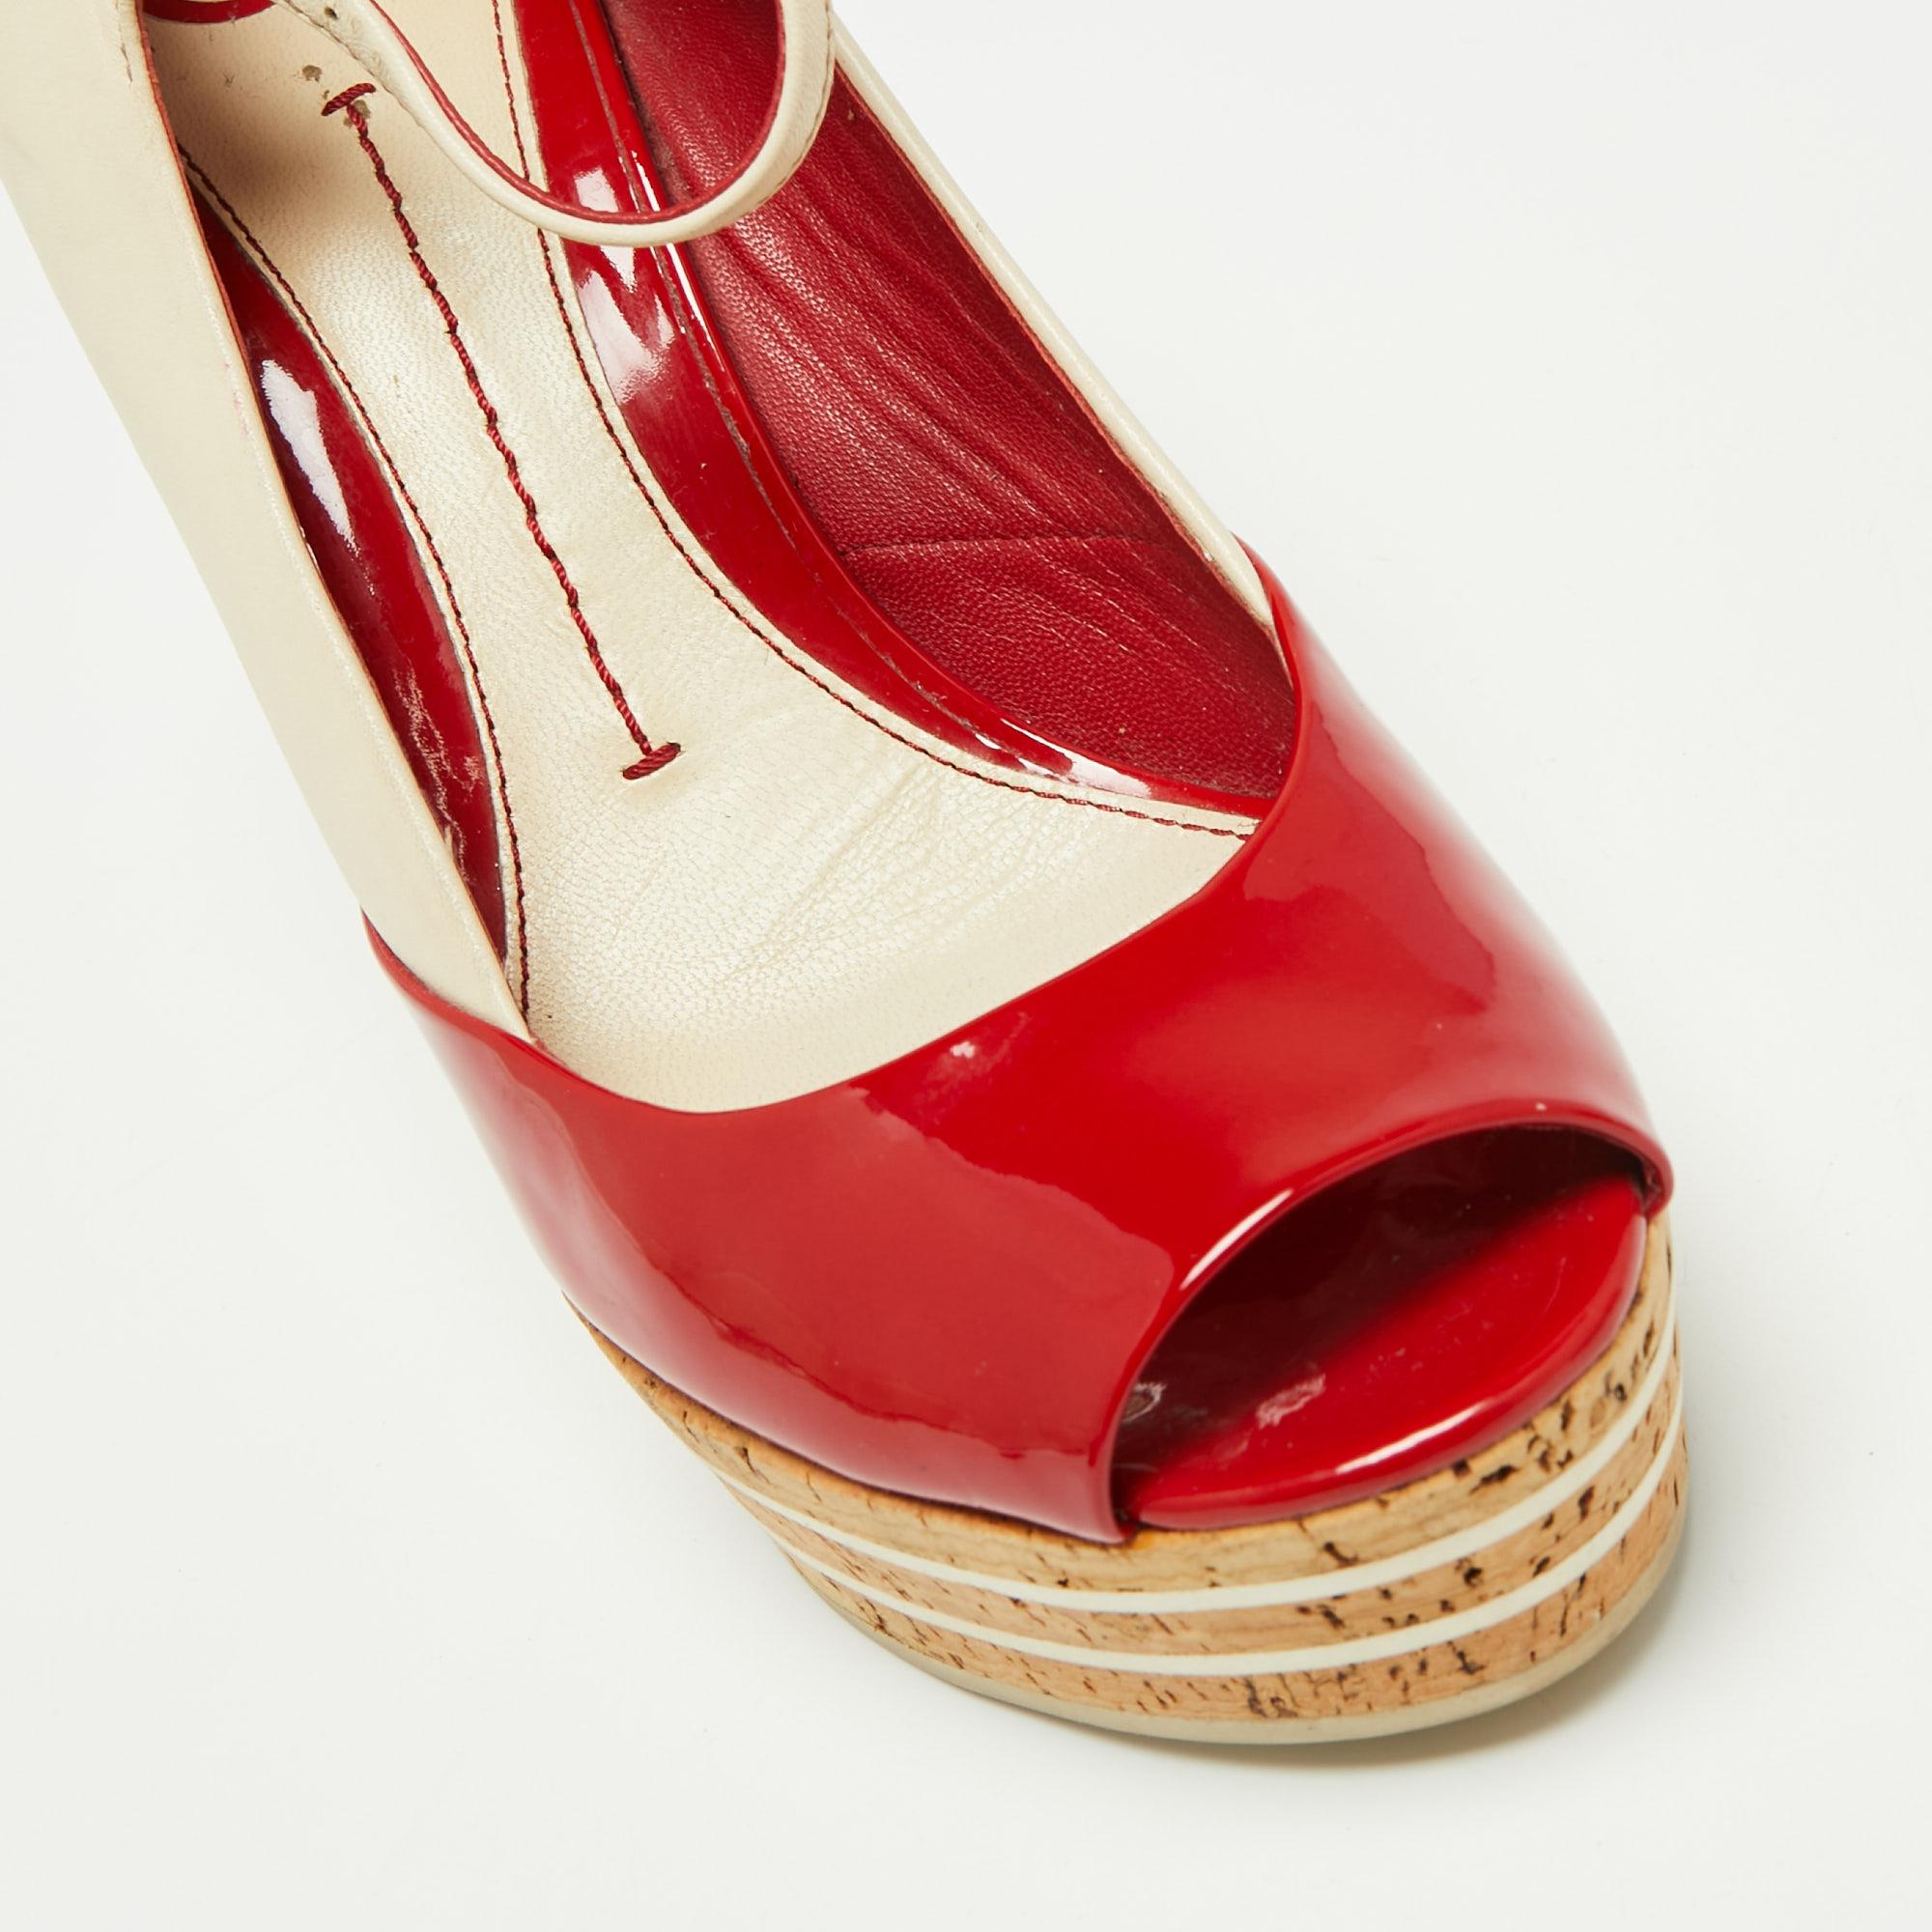 Gucci Red/Cream Patent Leather Colorblock Platform Wedge Peep Toe Pumps Size 38 For Sale 2